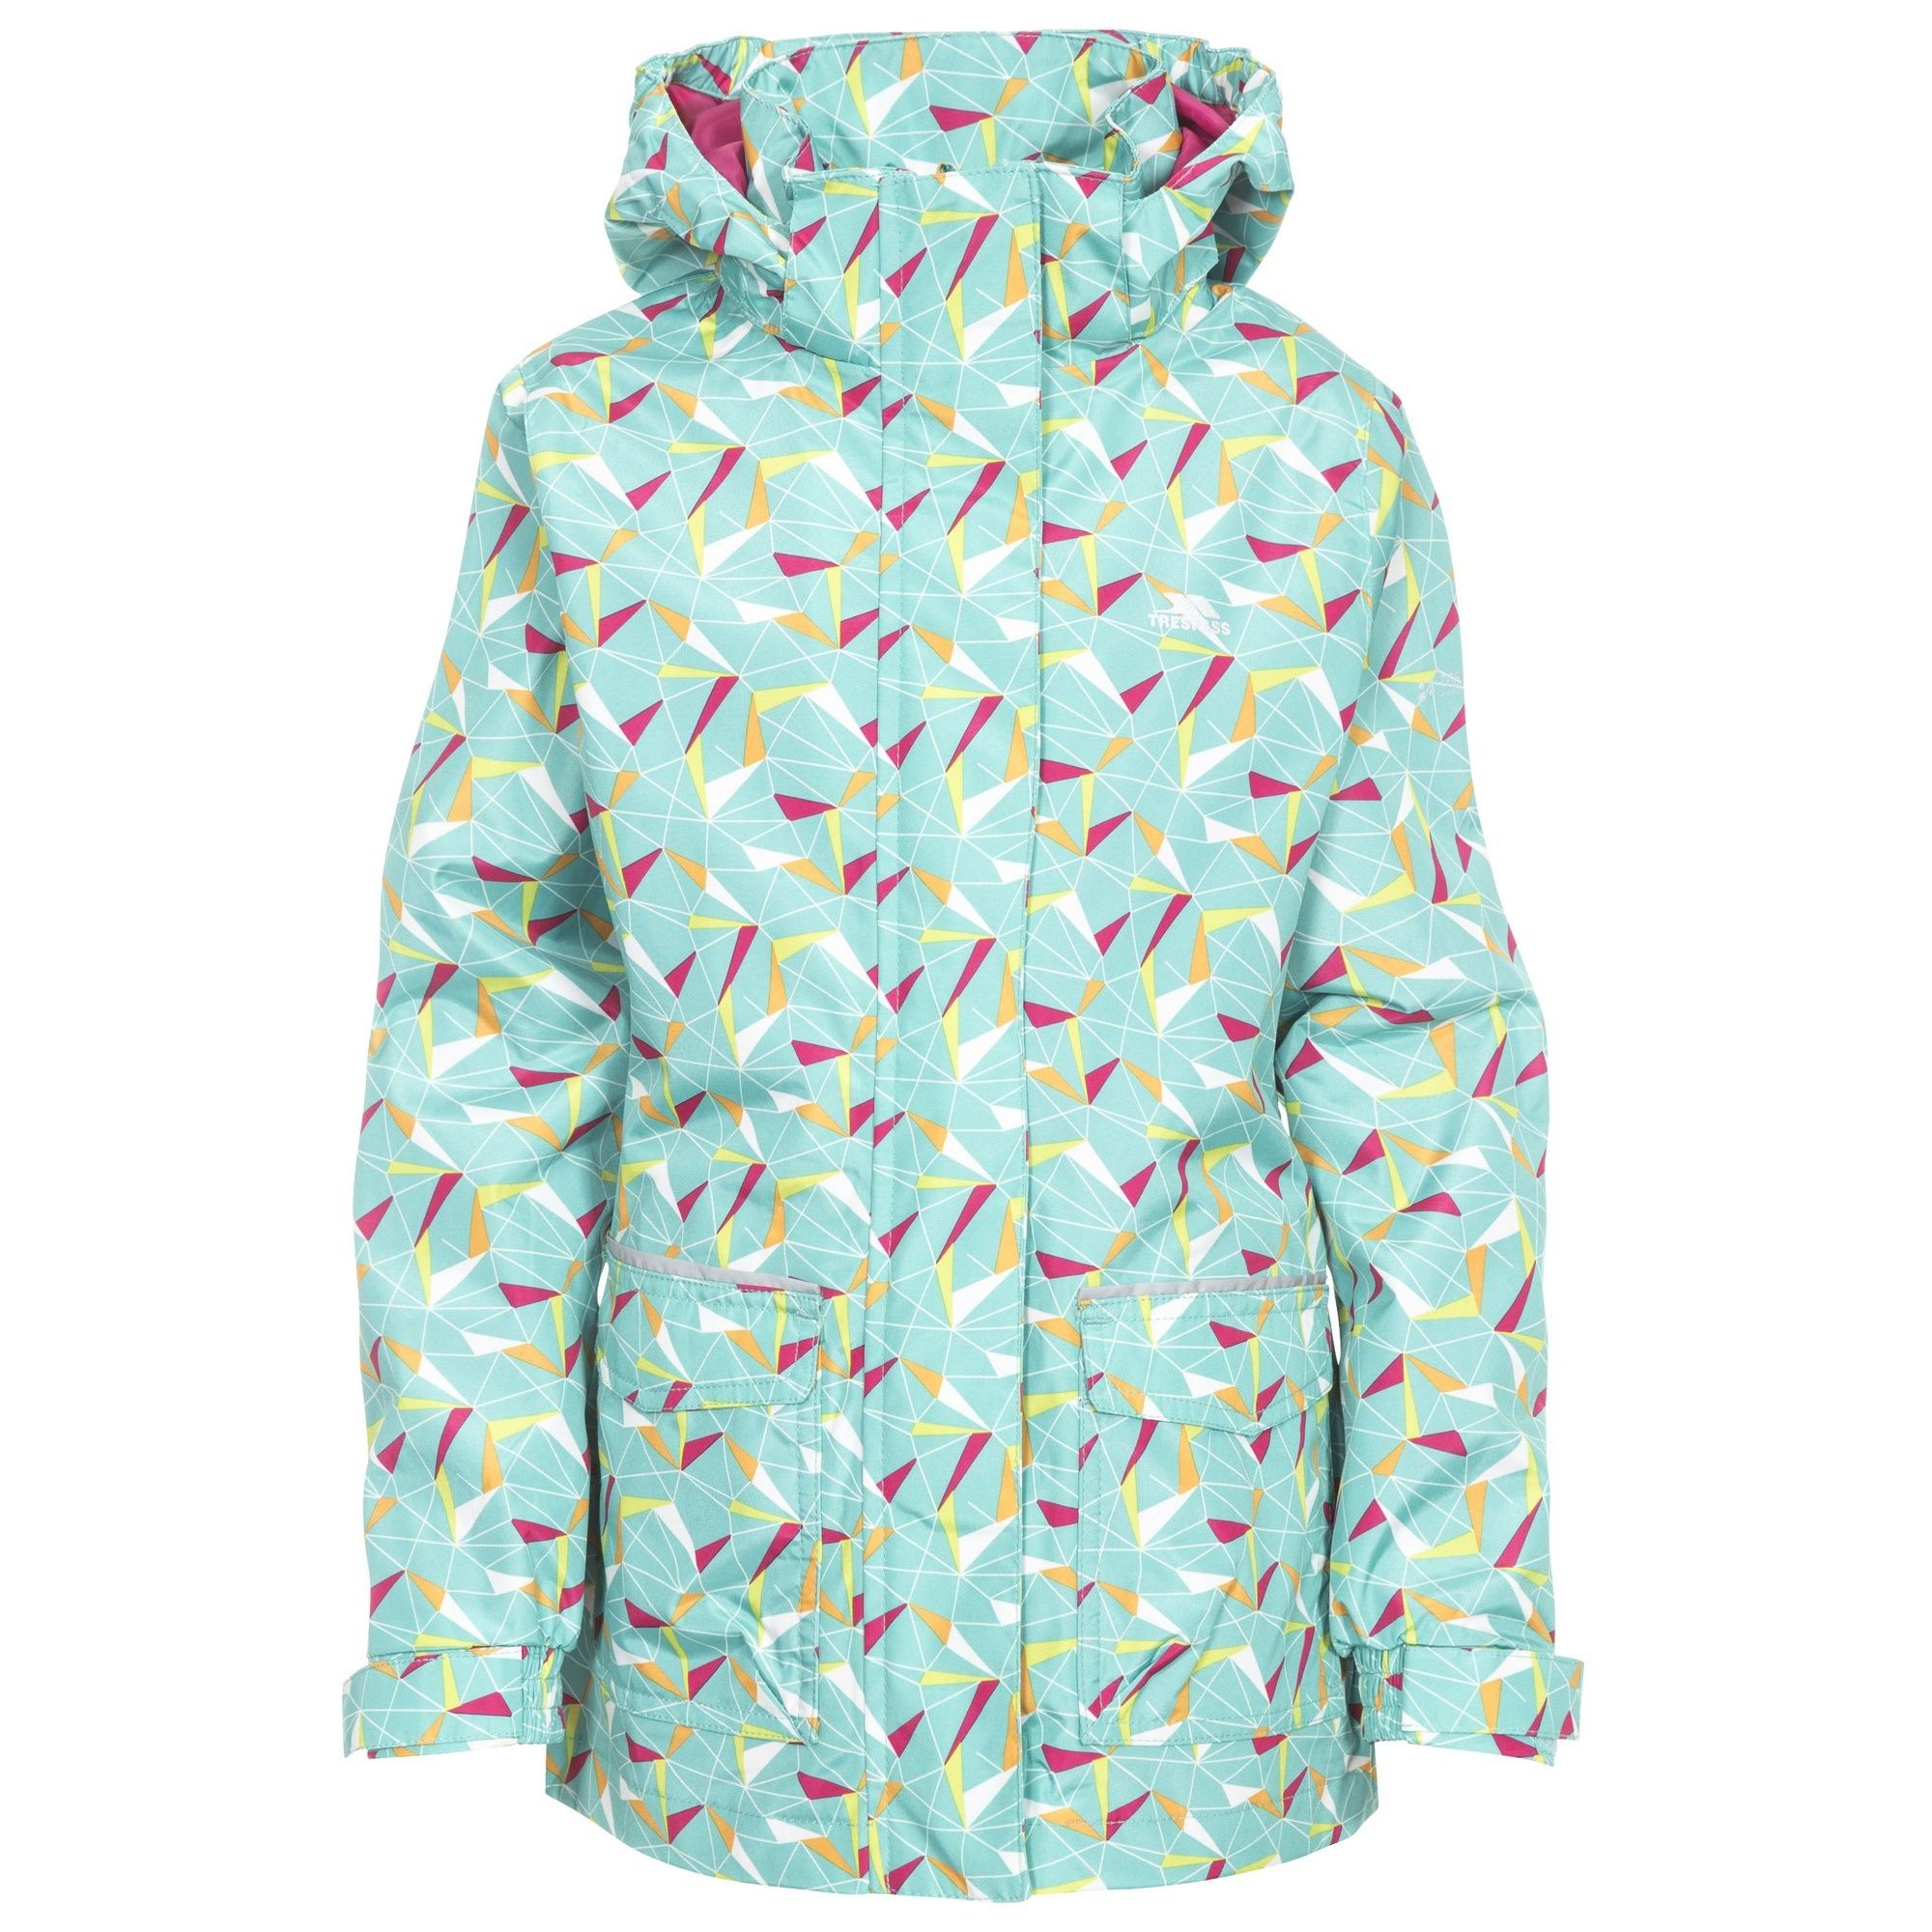 Printed jacket with 2 patch pockets. Reflective trim on pockets. Adjustable cuffs. Concealed hood, folds into collar. Waterproof 3000mm, windproof, taped seams. Shell: 100% polyester, PVC coated. Lining: 100% polyester. Trespass Childrens Chest Sizing (approx): 2/3 Years - 21in/53cm, 3/4 Years - 22in/56cm, 5/6 Years - 24in/61cm, 7/8 Years - 26in/66cm, 9/10 Years - 28in/71cm, 11/12 Years - 31in/79cm.